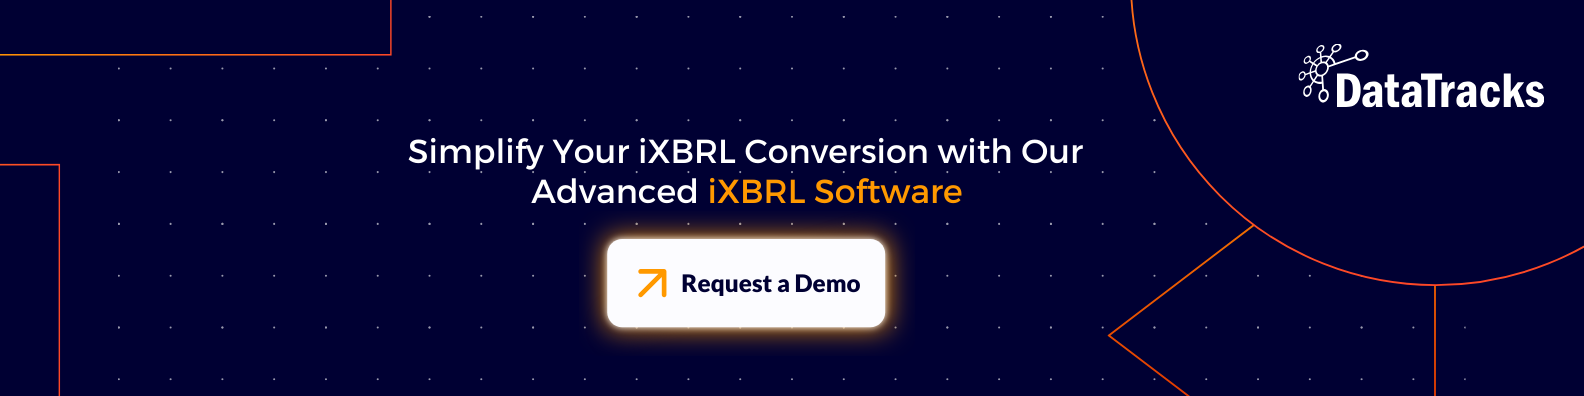 Streamline Your iXBRL Conversion With Our iXBRL Software